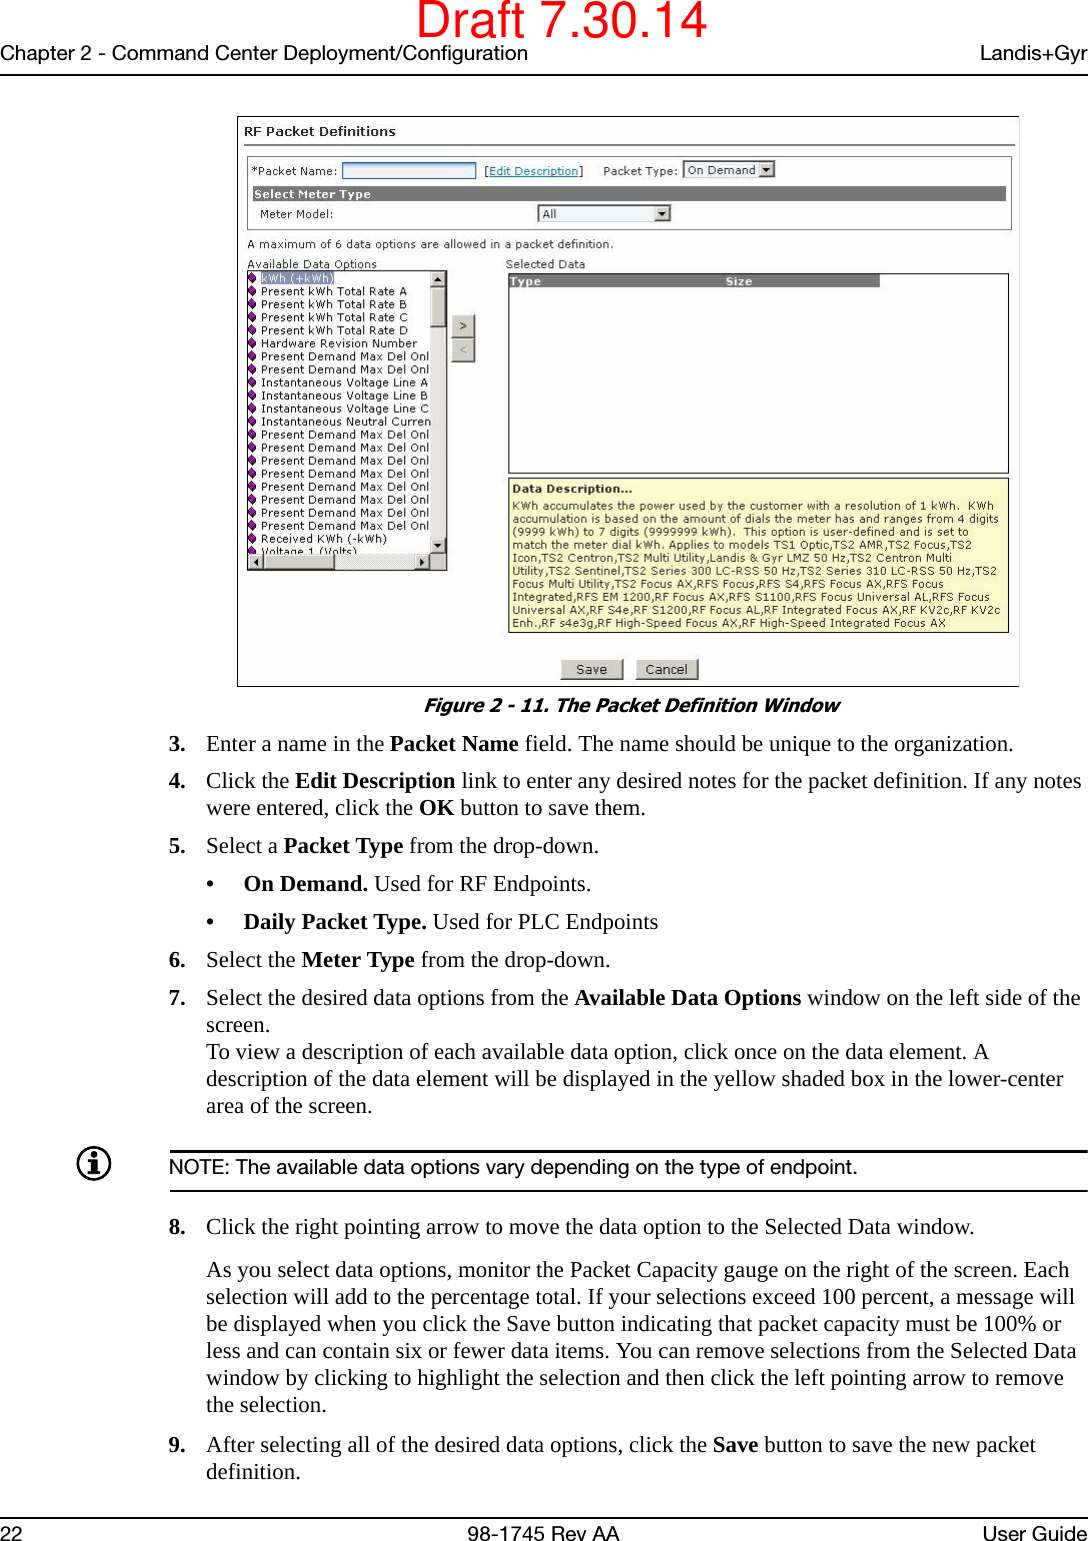 Chapter 2 - Command Center Deployment/Configuration Landis+Gyr22 98-1745 Rev AA User Guide Figure 2 - 11. The Packet Definition Window3. Enter a name in the Packet Name field. The name should be unique to the organization.4. Click the Edit Description link to enter any desired notes for the packet definition. If any notes were entered, click the OK button to save them.5. Select a Packet Type from the drop-down.•On Demand. Used for RF Endpoints.• Daily Packet Type. Used for PLC Endpoints6. Select the Meter Type from the drop-down.7. Select the desired data options from the Available Data Options window on the left side of the screen.To view a description of each available data option, click once on the data element. A description of the data element will be displayed in the yellow shaded box in the lower-center area of the screen.NOTE: The available data options vary depending on the type of endpoint.8. Click the right pointing arrow to move the data option to the Selected Data window.As you select data options, monitor the Packet Capacity gauge on the right of the screen. Each selection will add to the percentage total. If your selections exceed 100 percent, a message will be displayed when you click the Save button indicating that packet capacity must be 100% or less and can contain six or fewer data items. You can remove selections from the Selected Data window by clicking to highlight the selection and then click the left pointing arrow to remove the selection.9. After selecting all of the desired data options, click the Save button to save the new packet definition.Draft 7.30.14